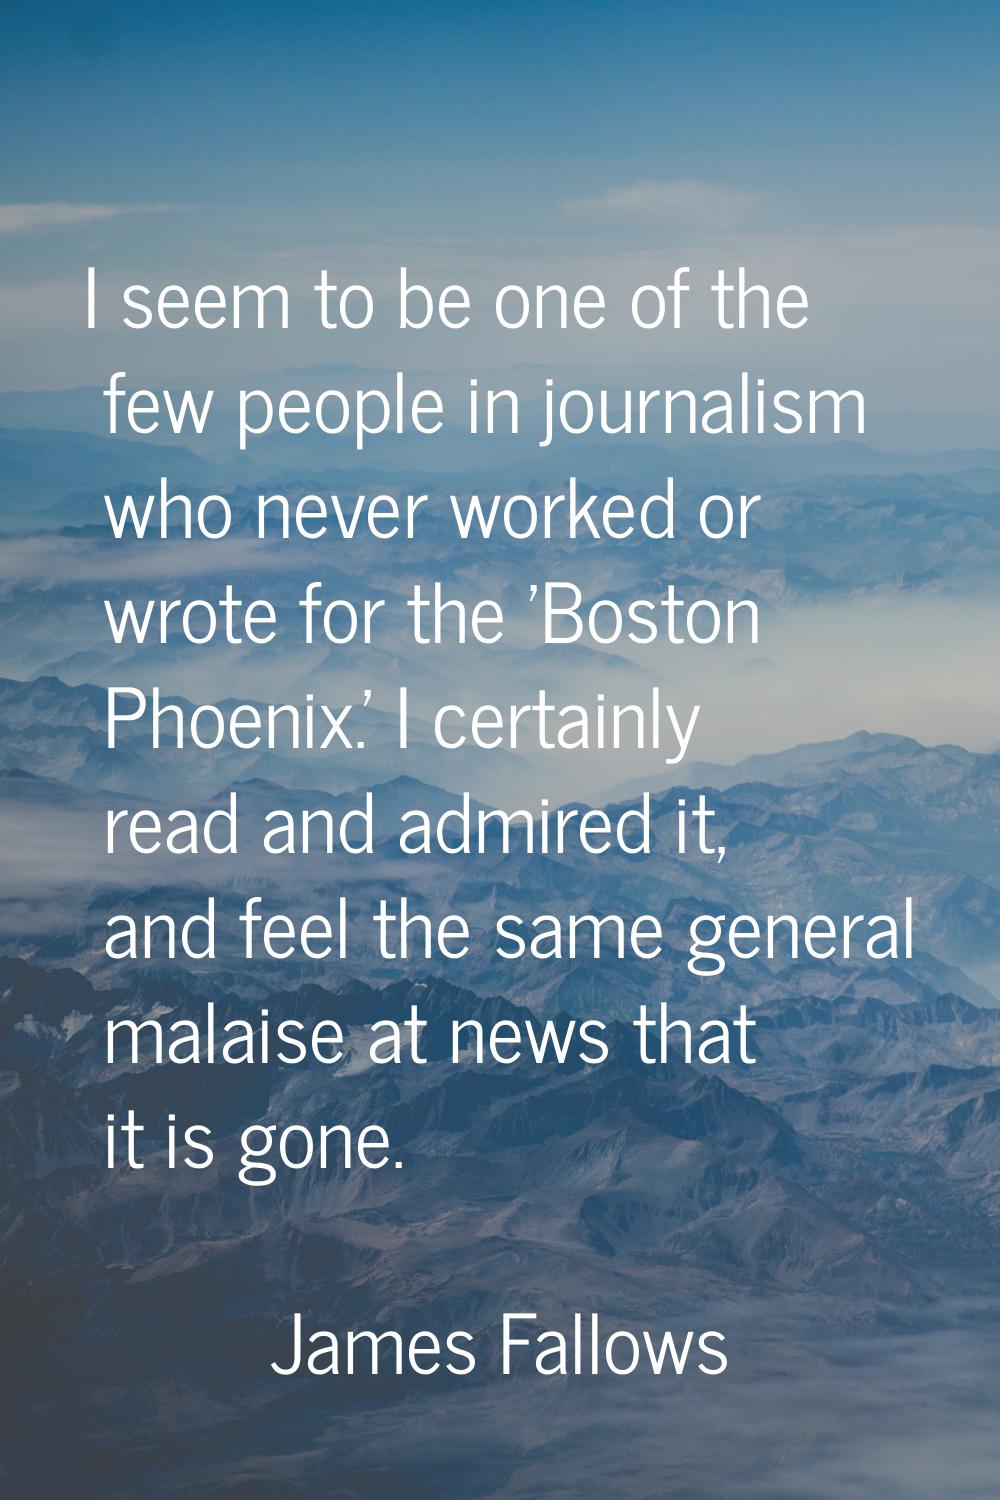 I seem to be one of the few people in journalism who never worked or wrote for the 'Boston Phoenix.